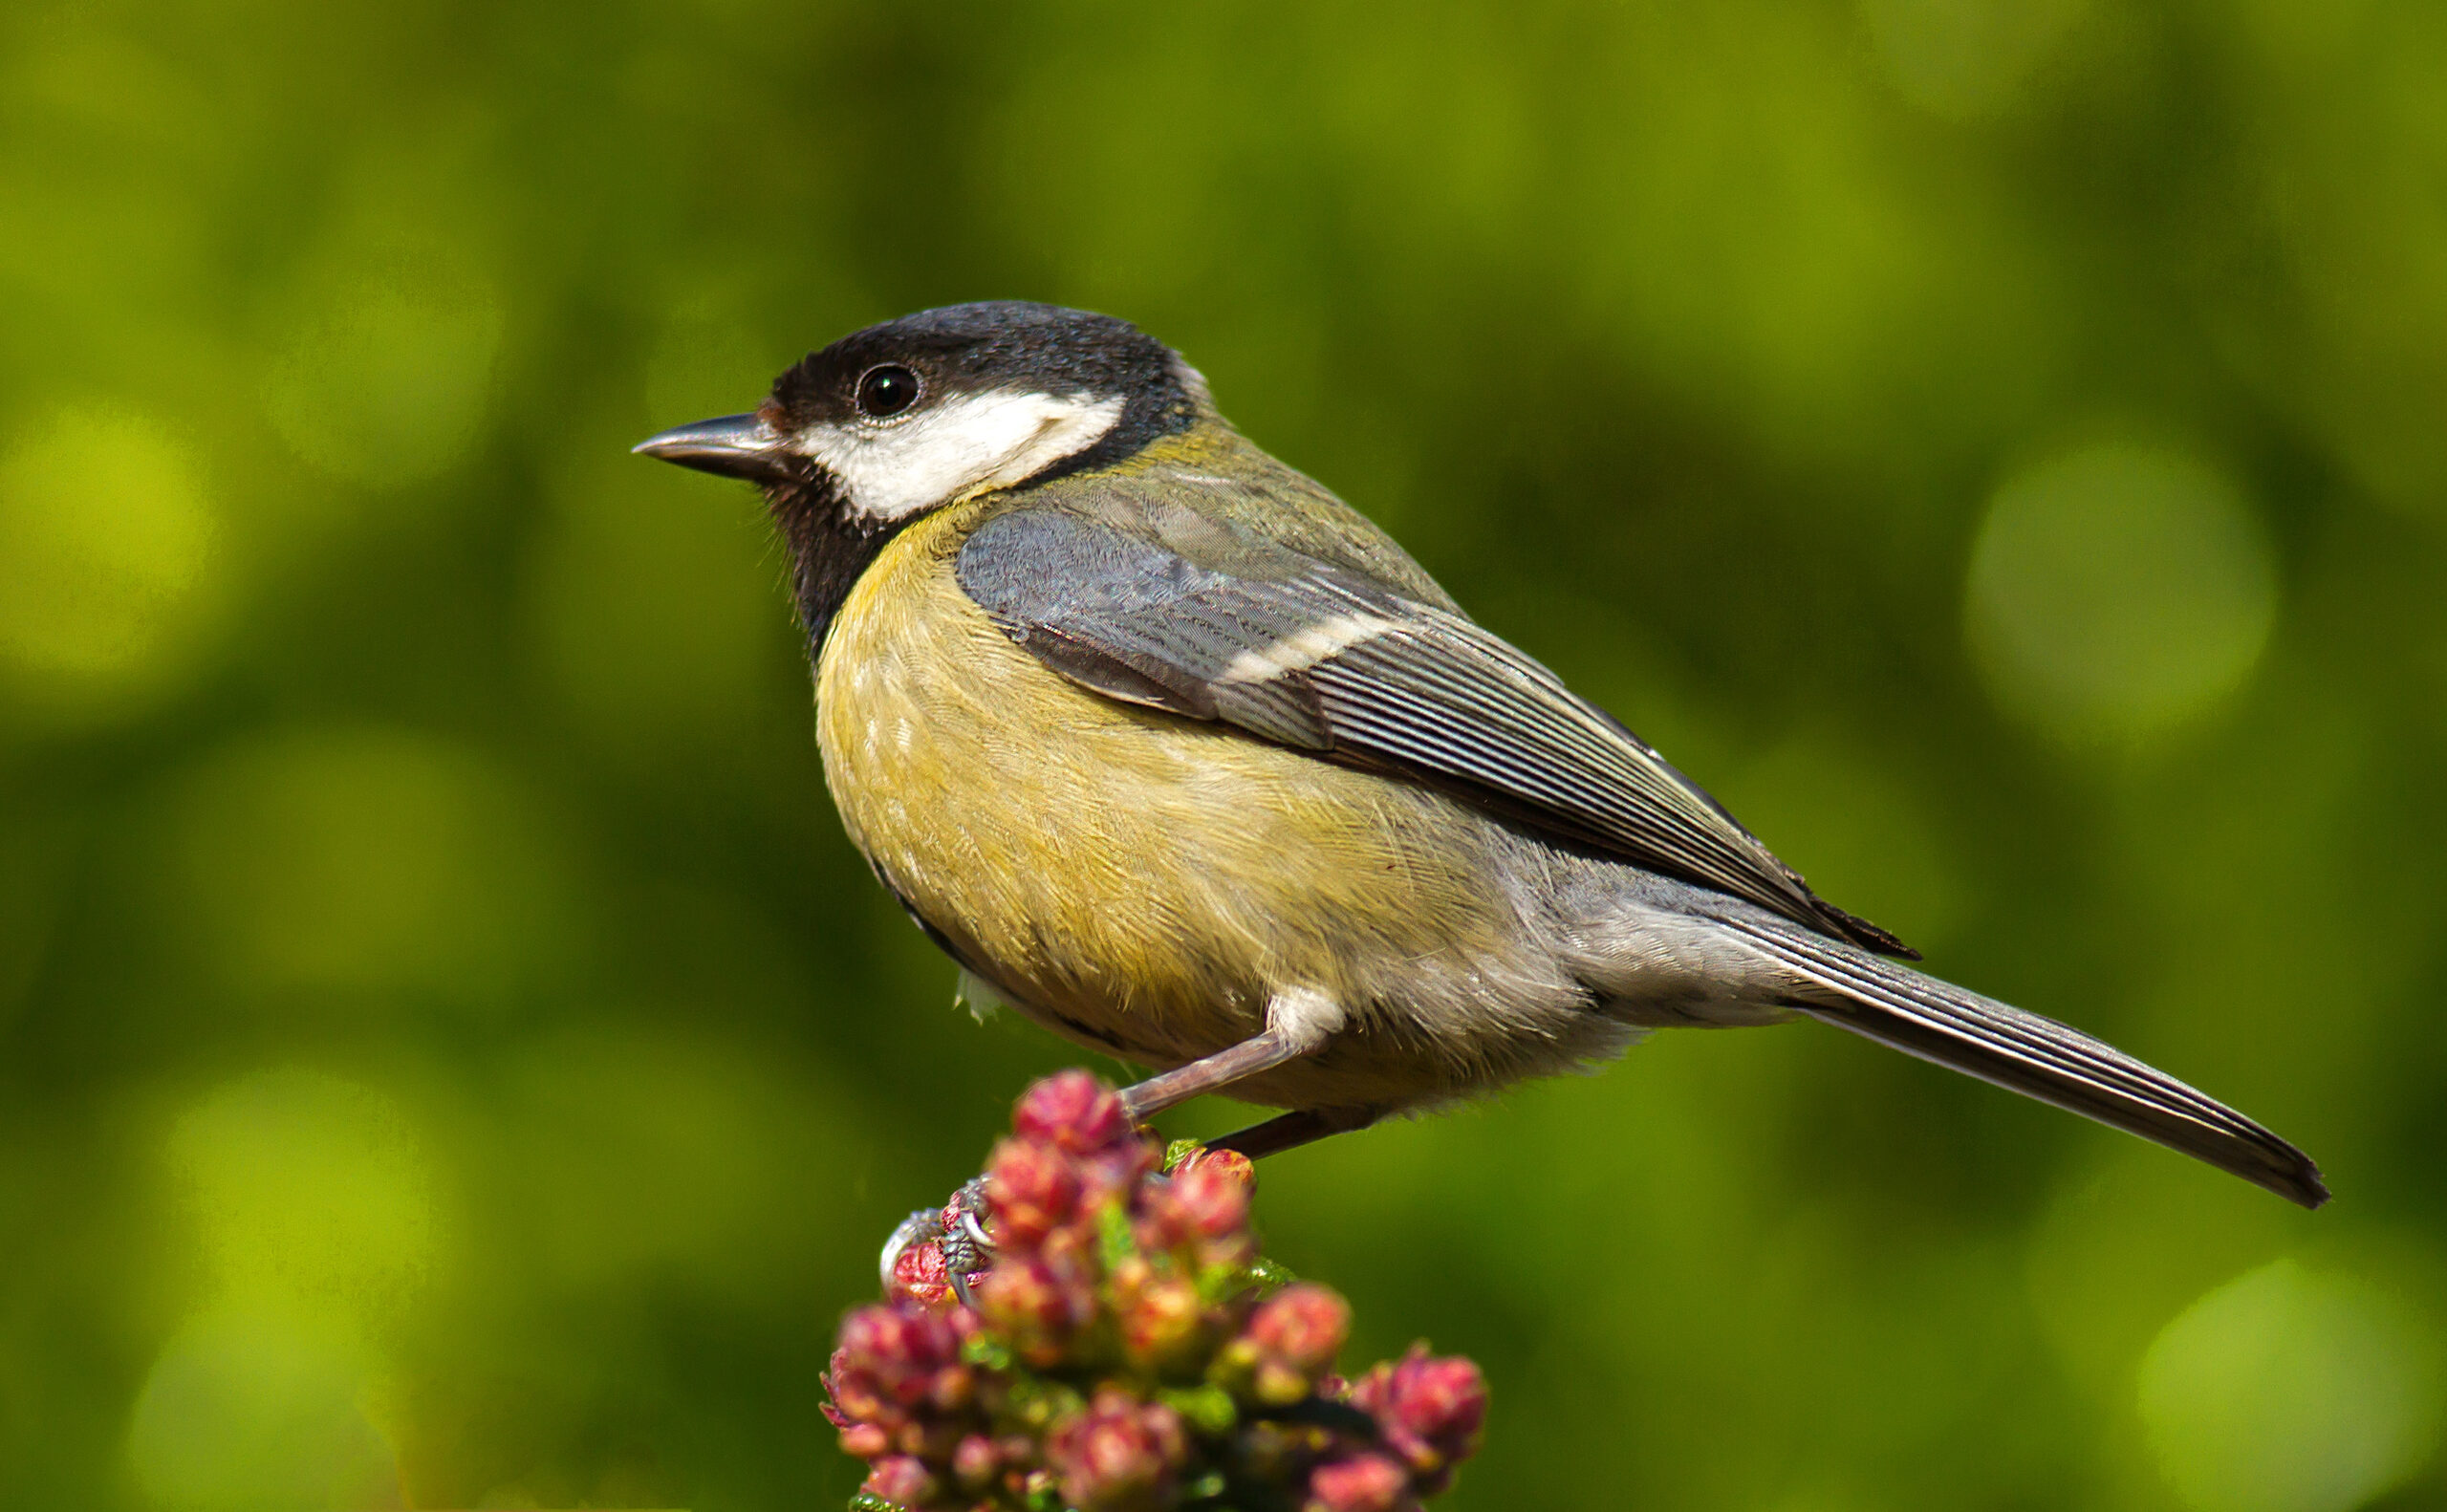 Great tits are killing birds and eating their brains. Climate